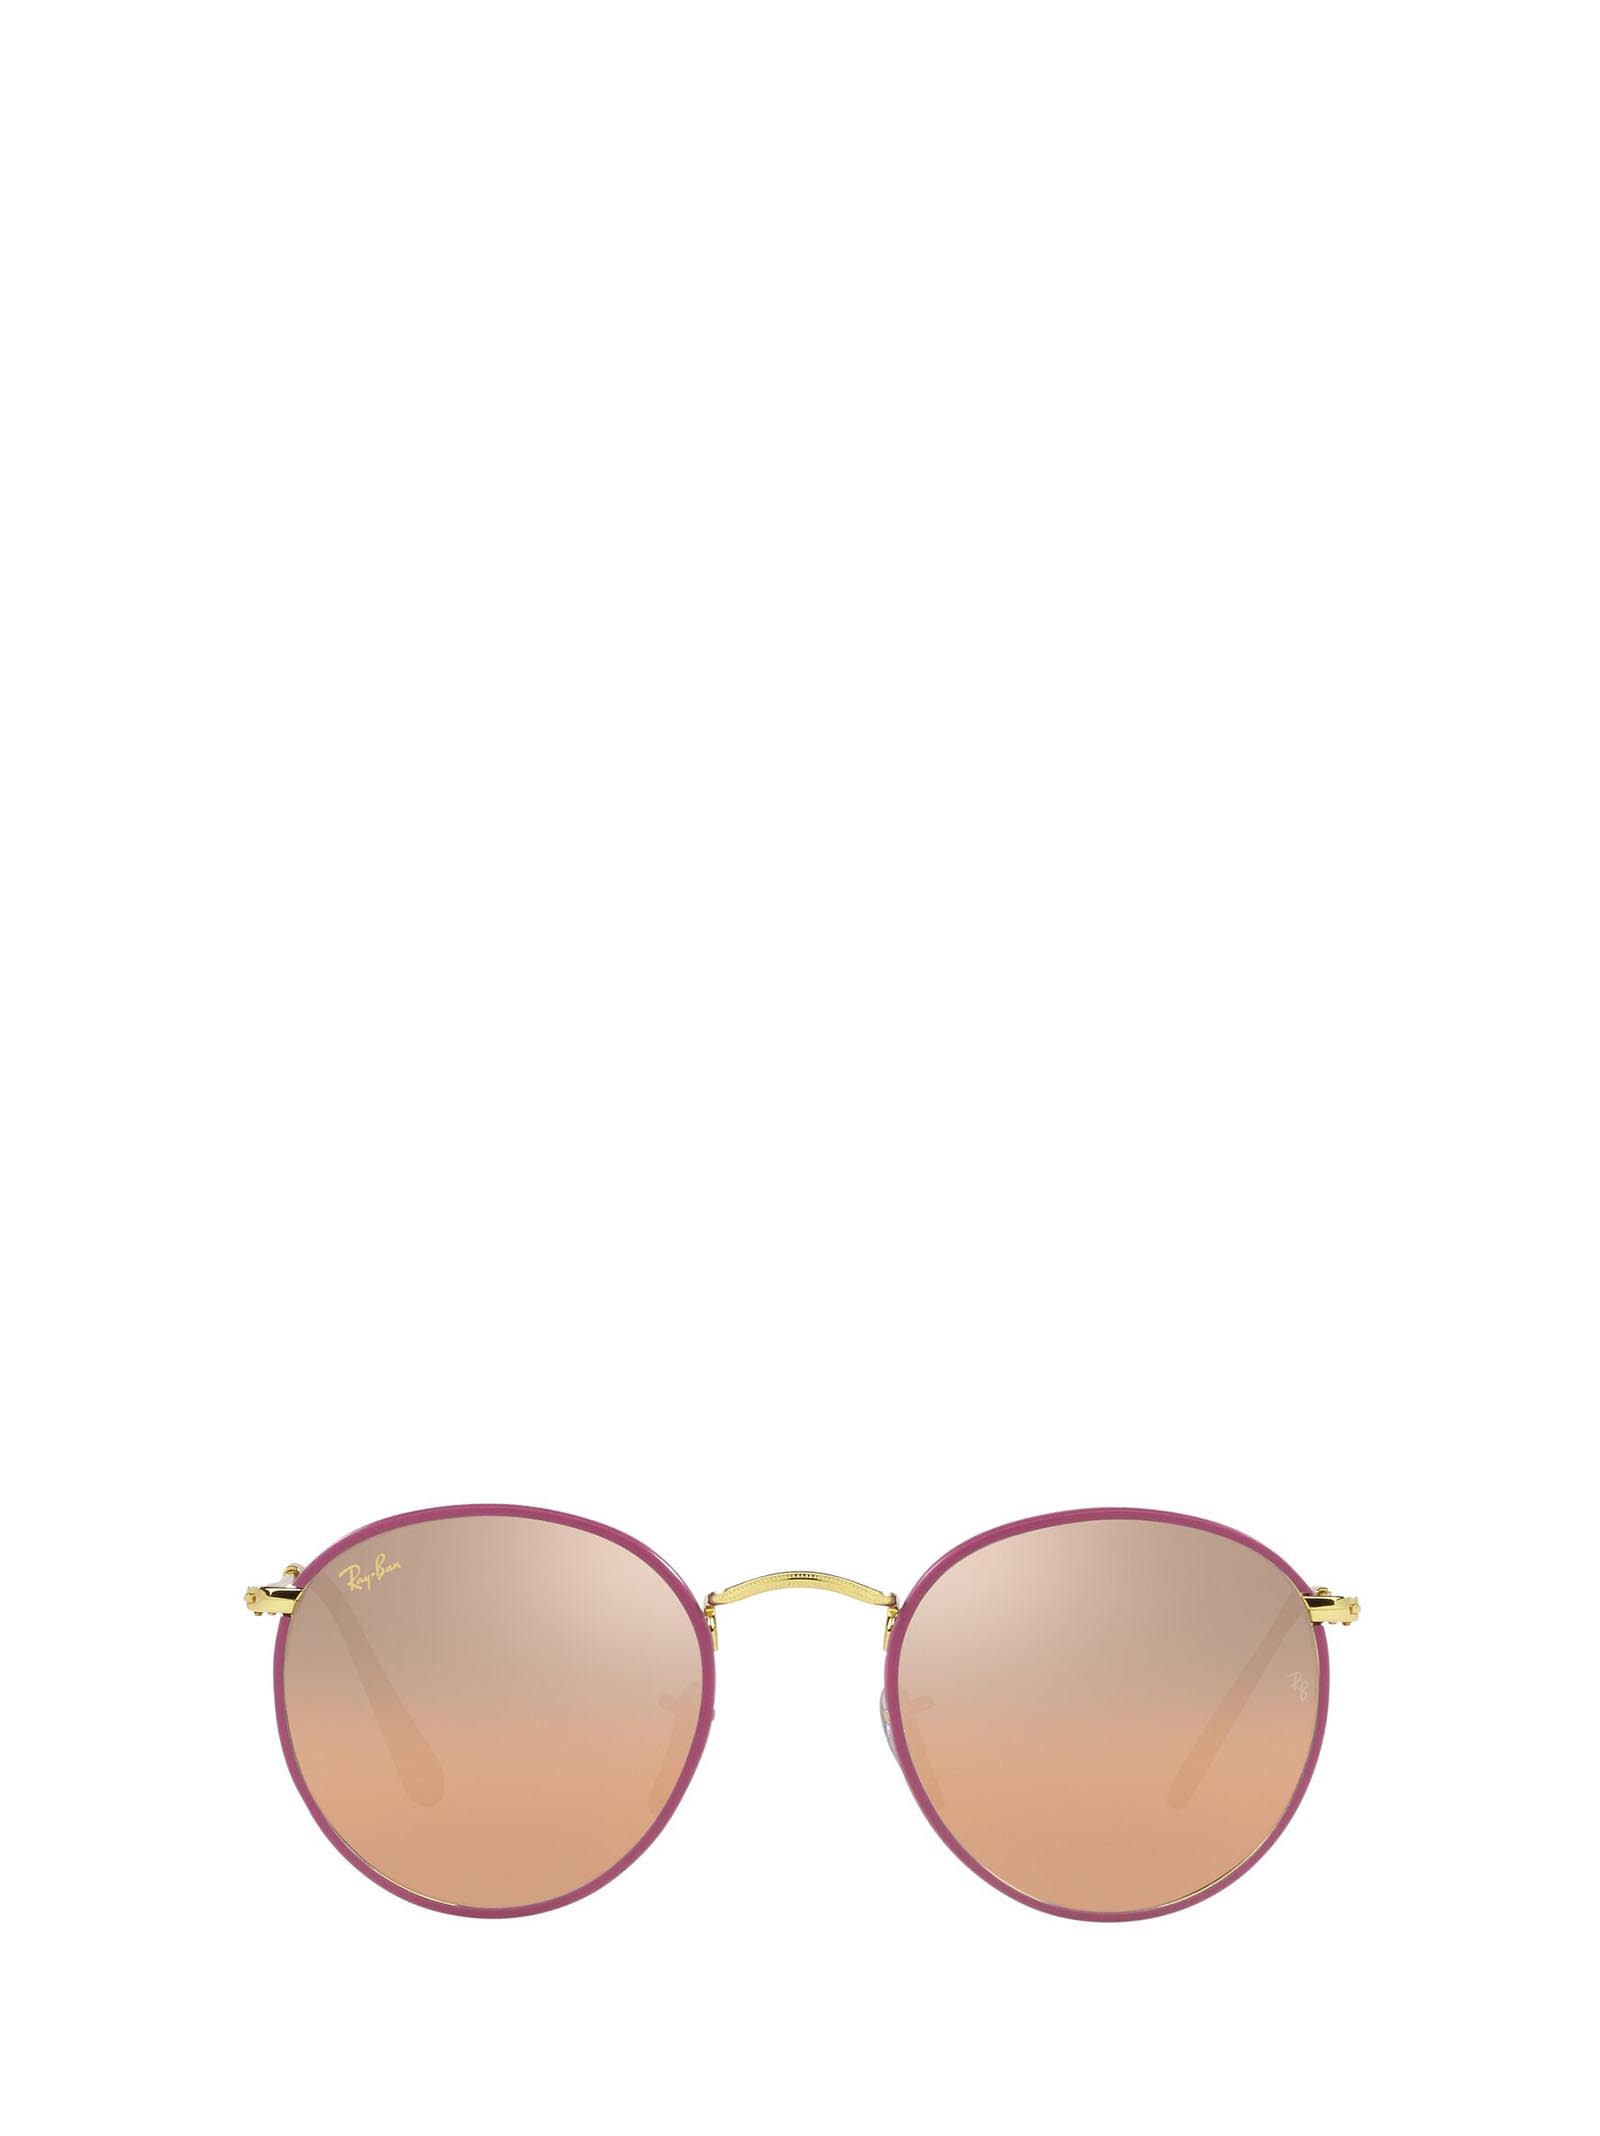 Ray Ban Ray-ban Rb3447jm Violet On Legend Gold Sunglasses